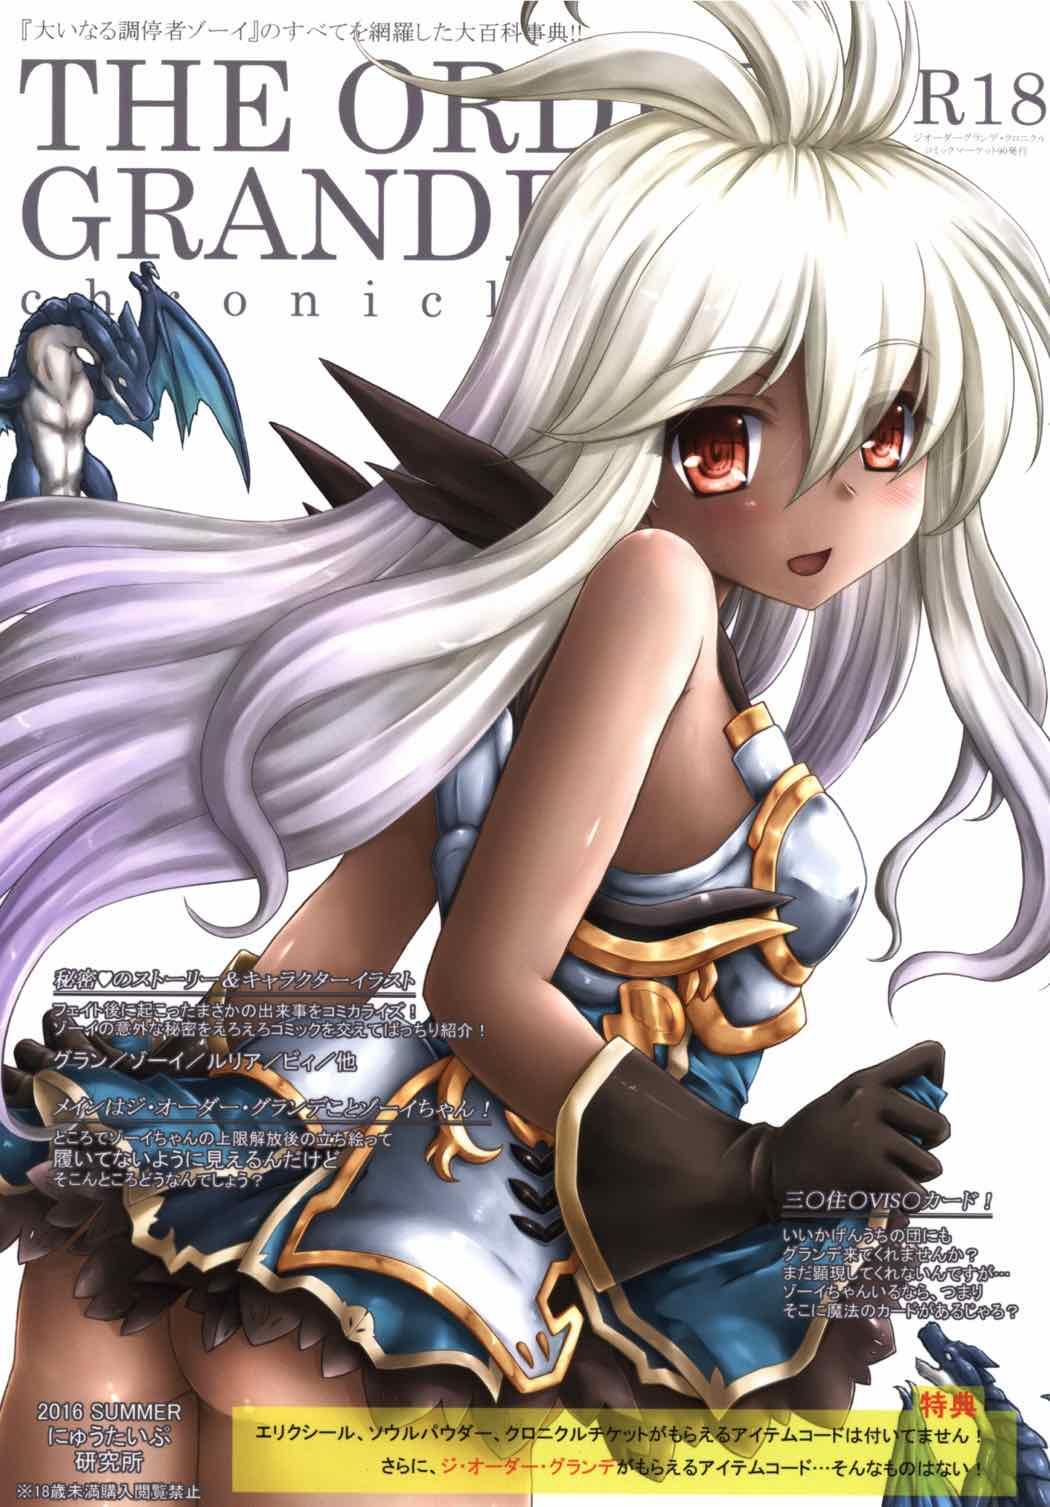 Chastity THE ORDER GRANDE chronicle - Granblue fantasy Blowjob Contest - Picture 1